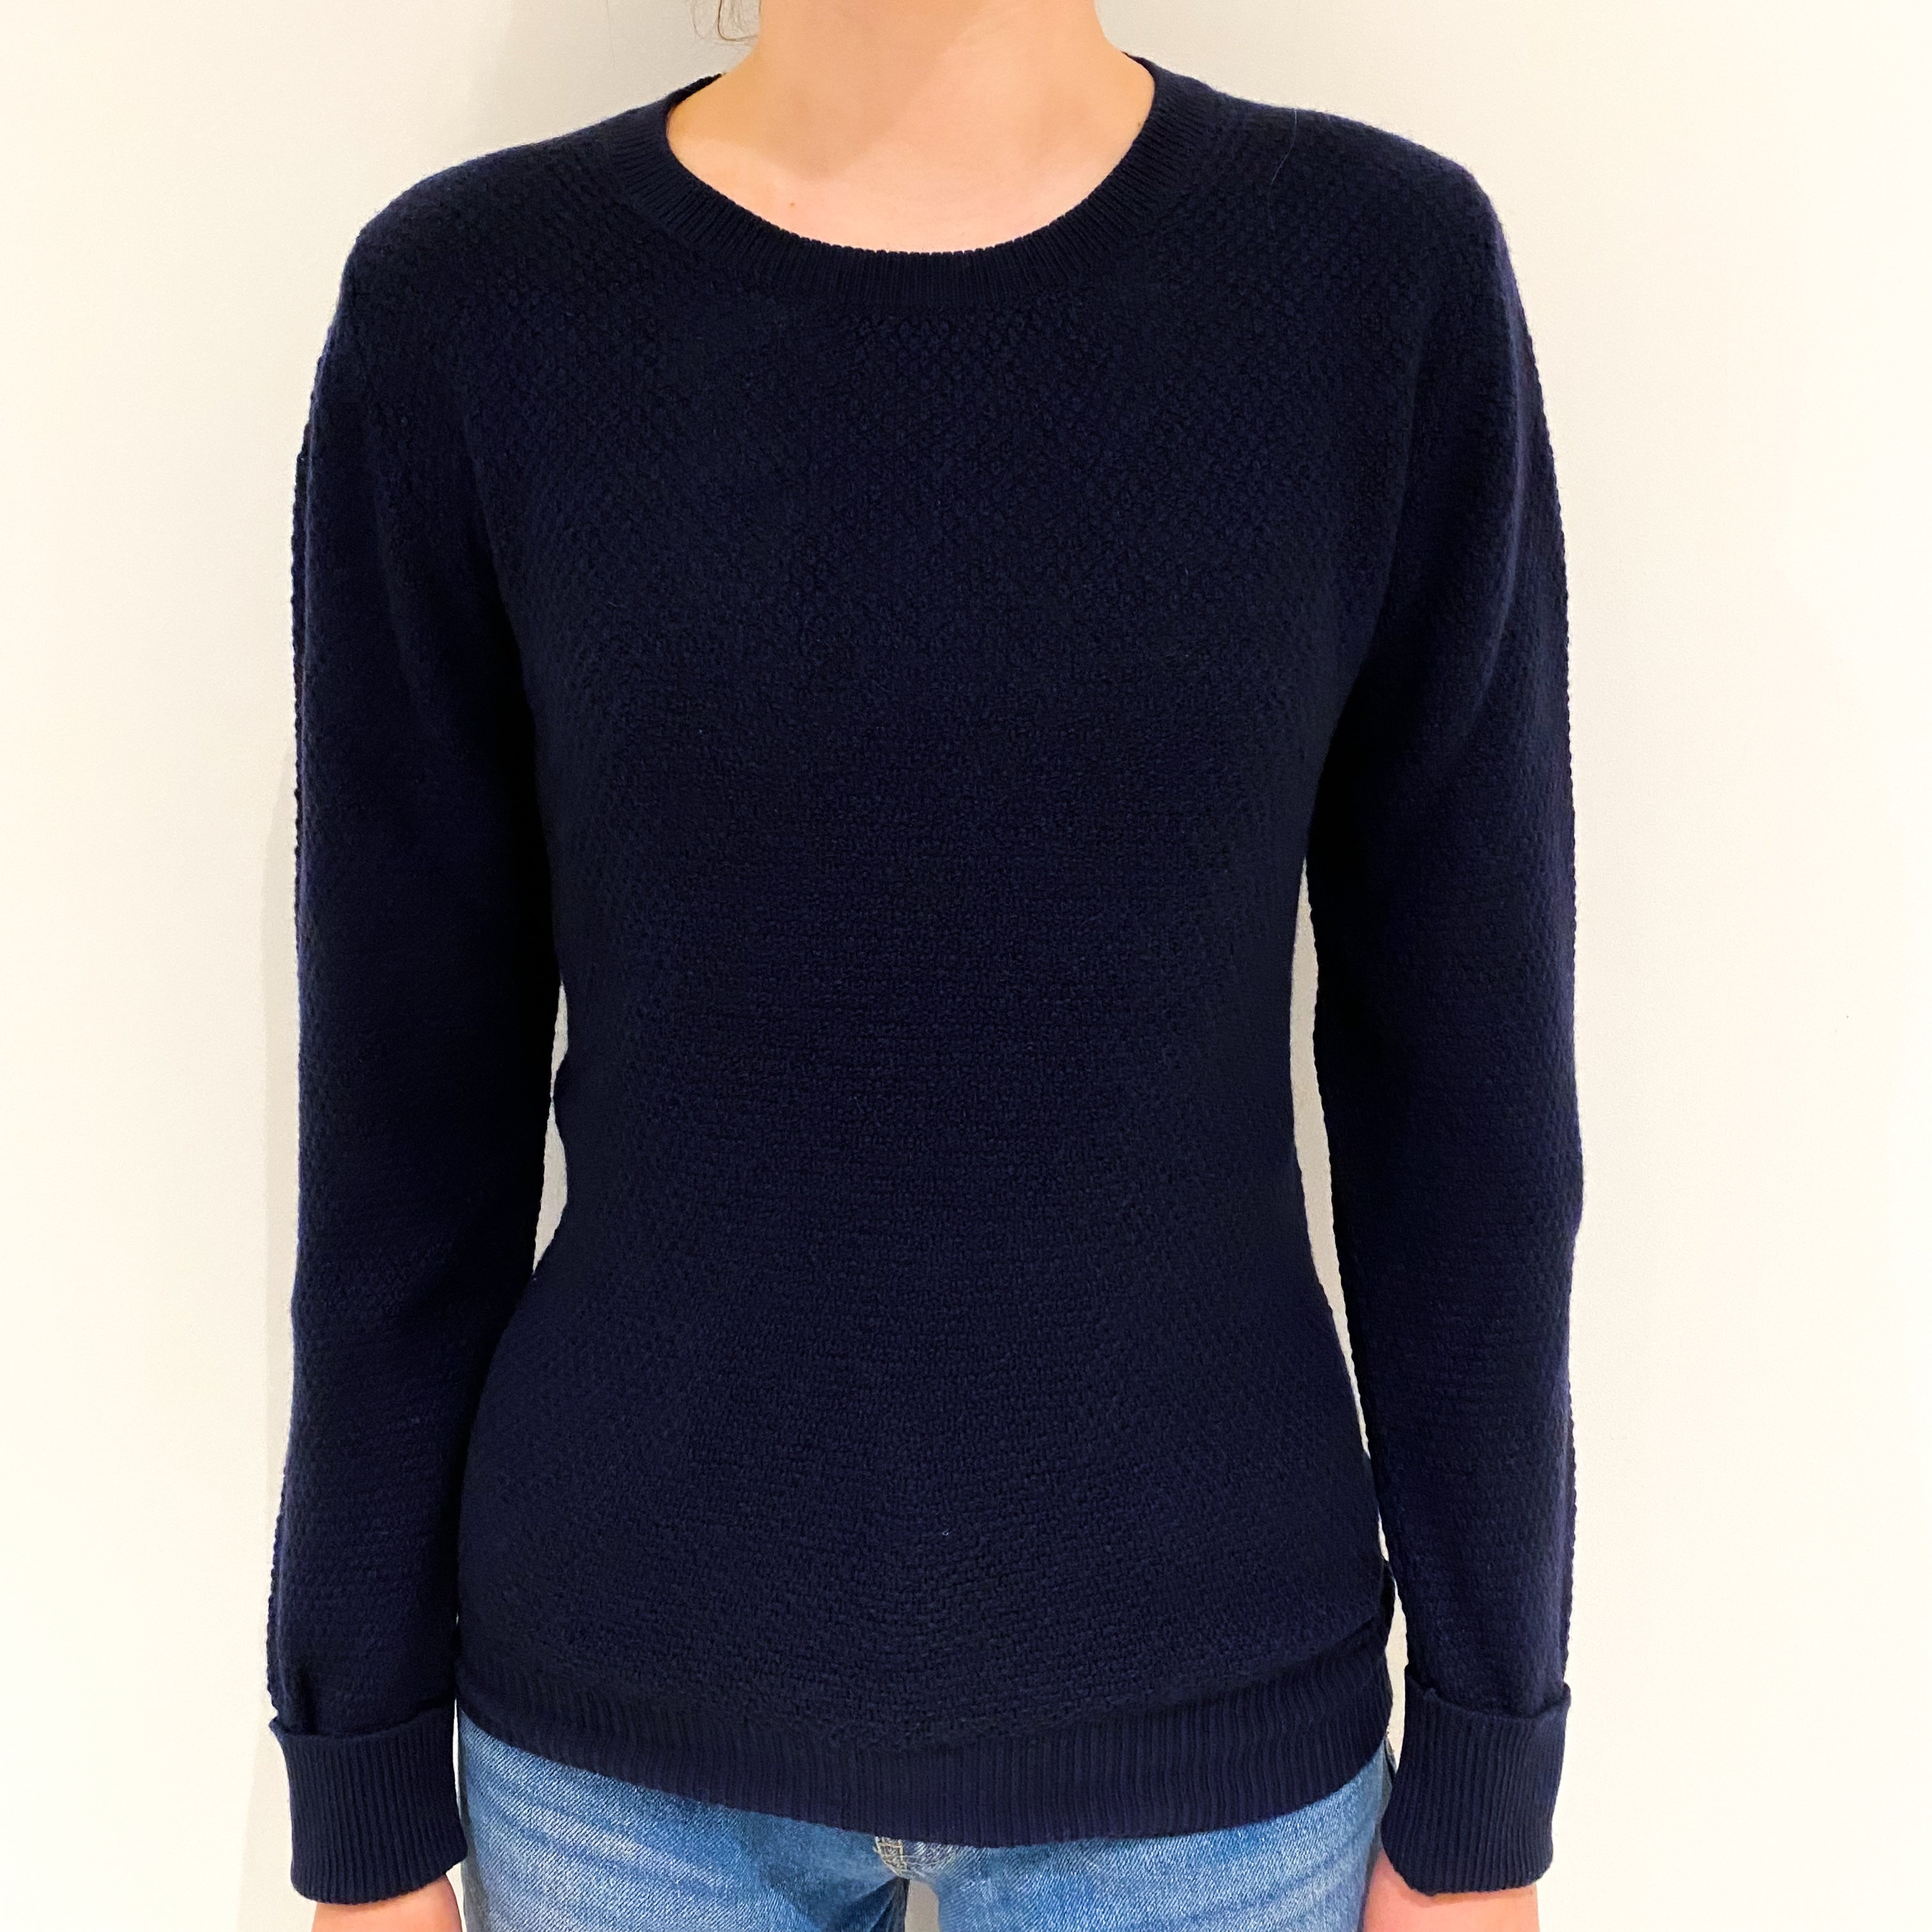 Brand New Navy Blue Cashmere Crew Neck Jumper Extra Small